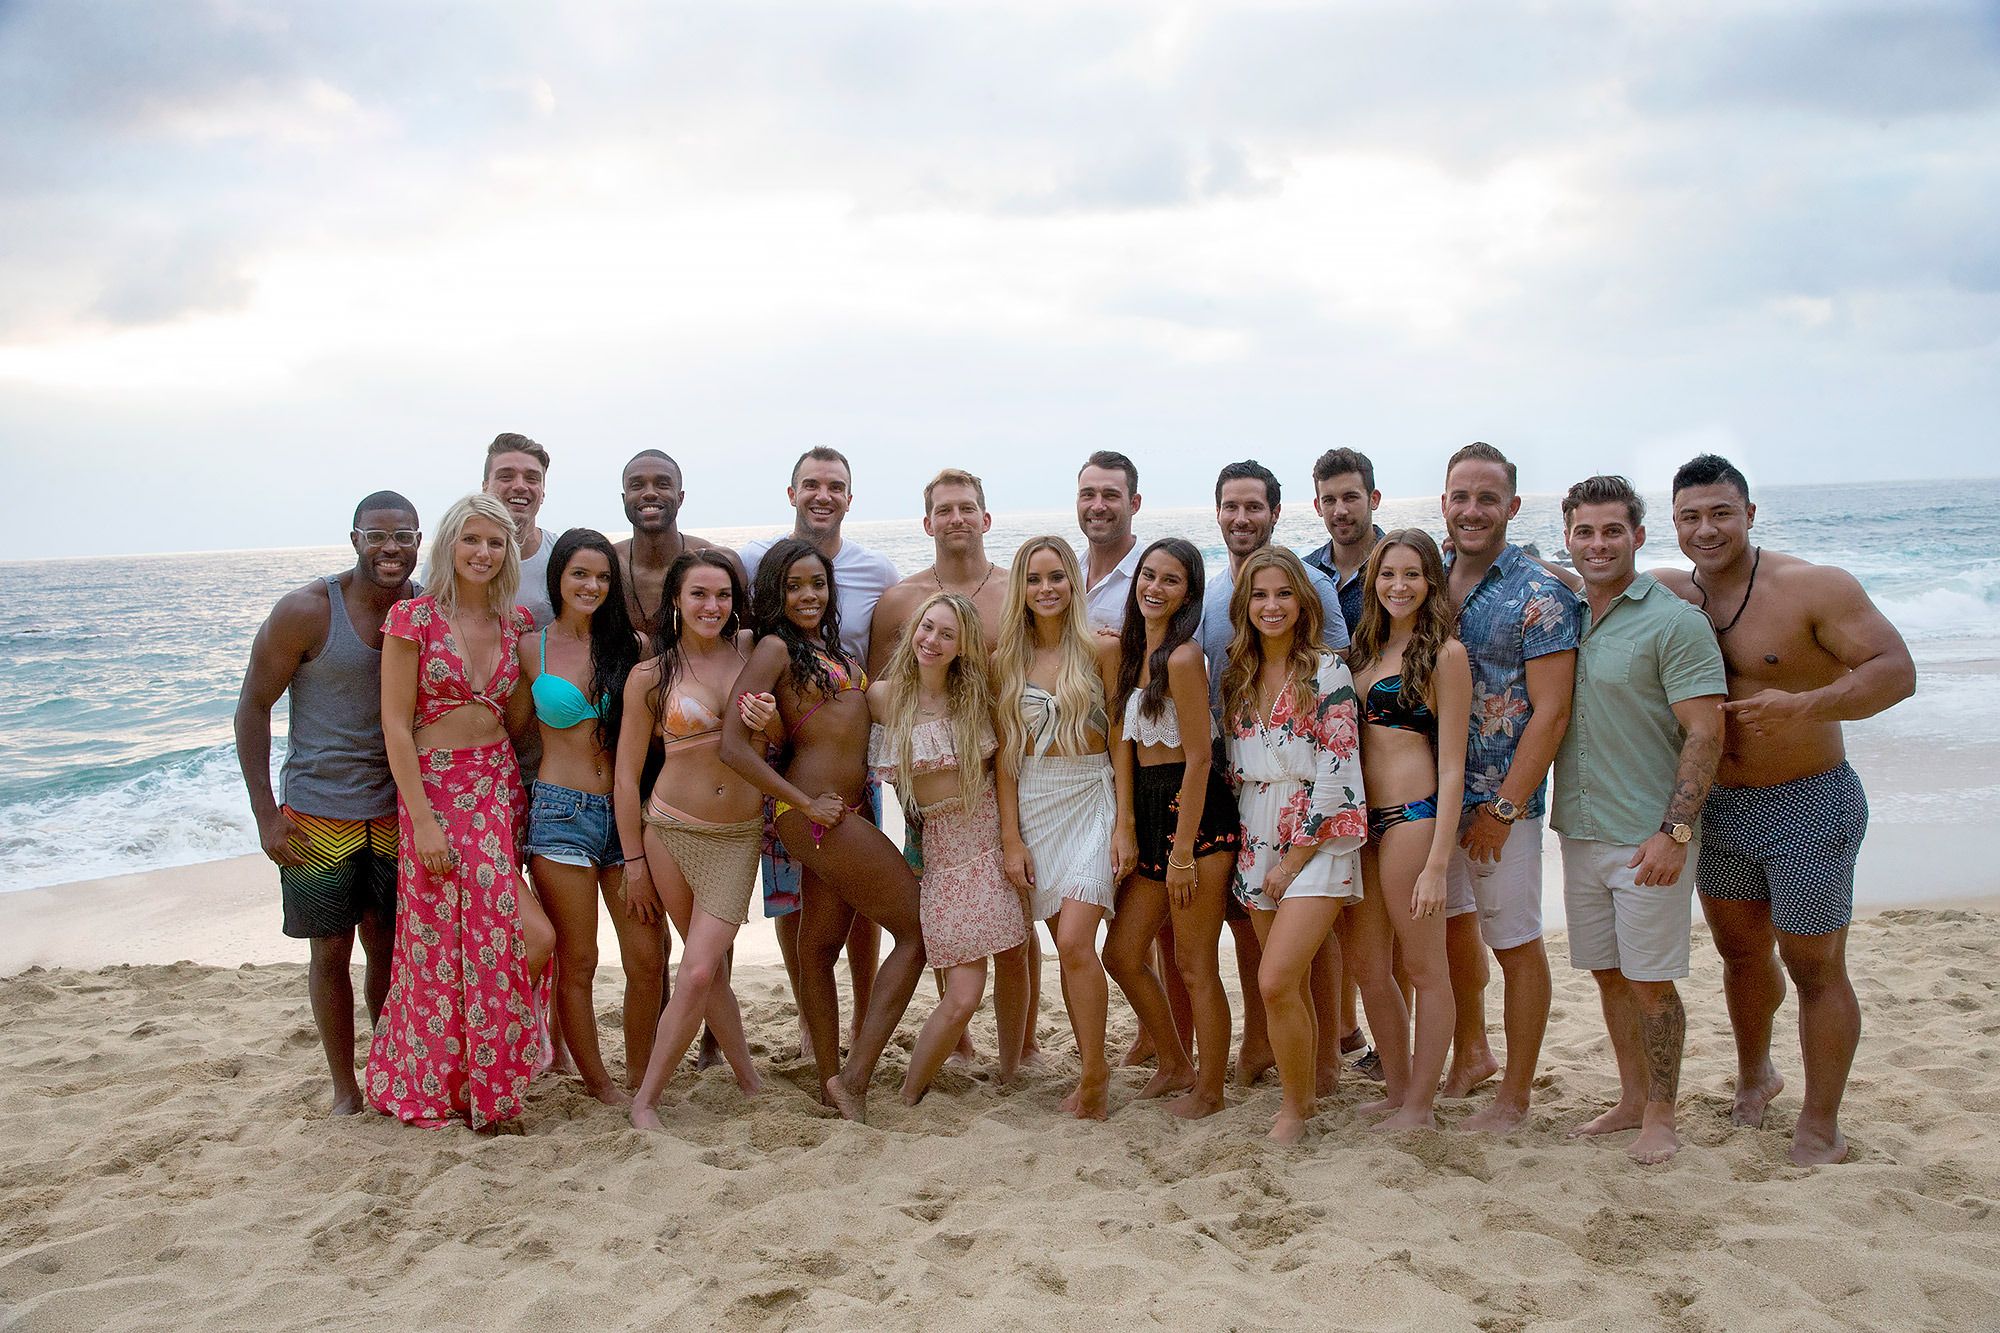 New Bachelor In Paradise Trailer Shows The Moment Production Was Shut